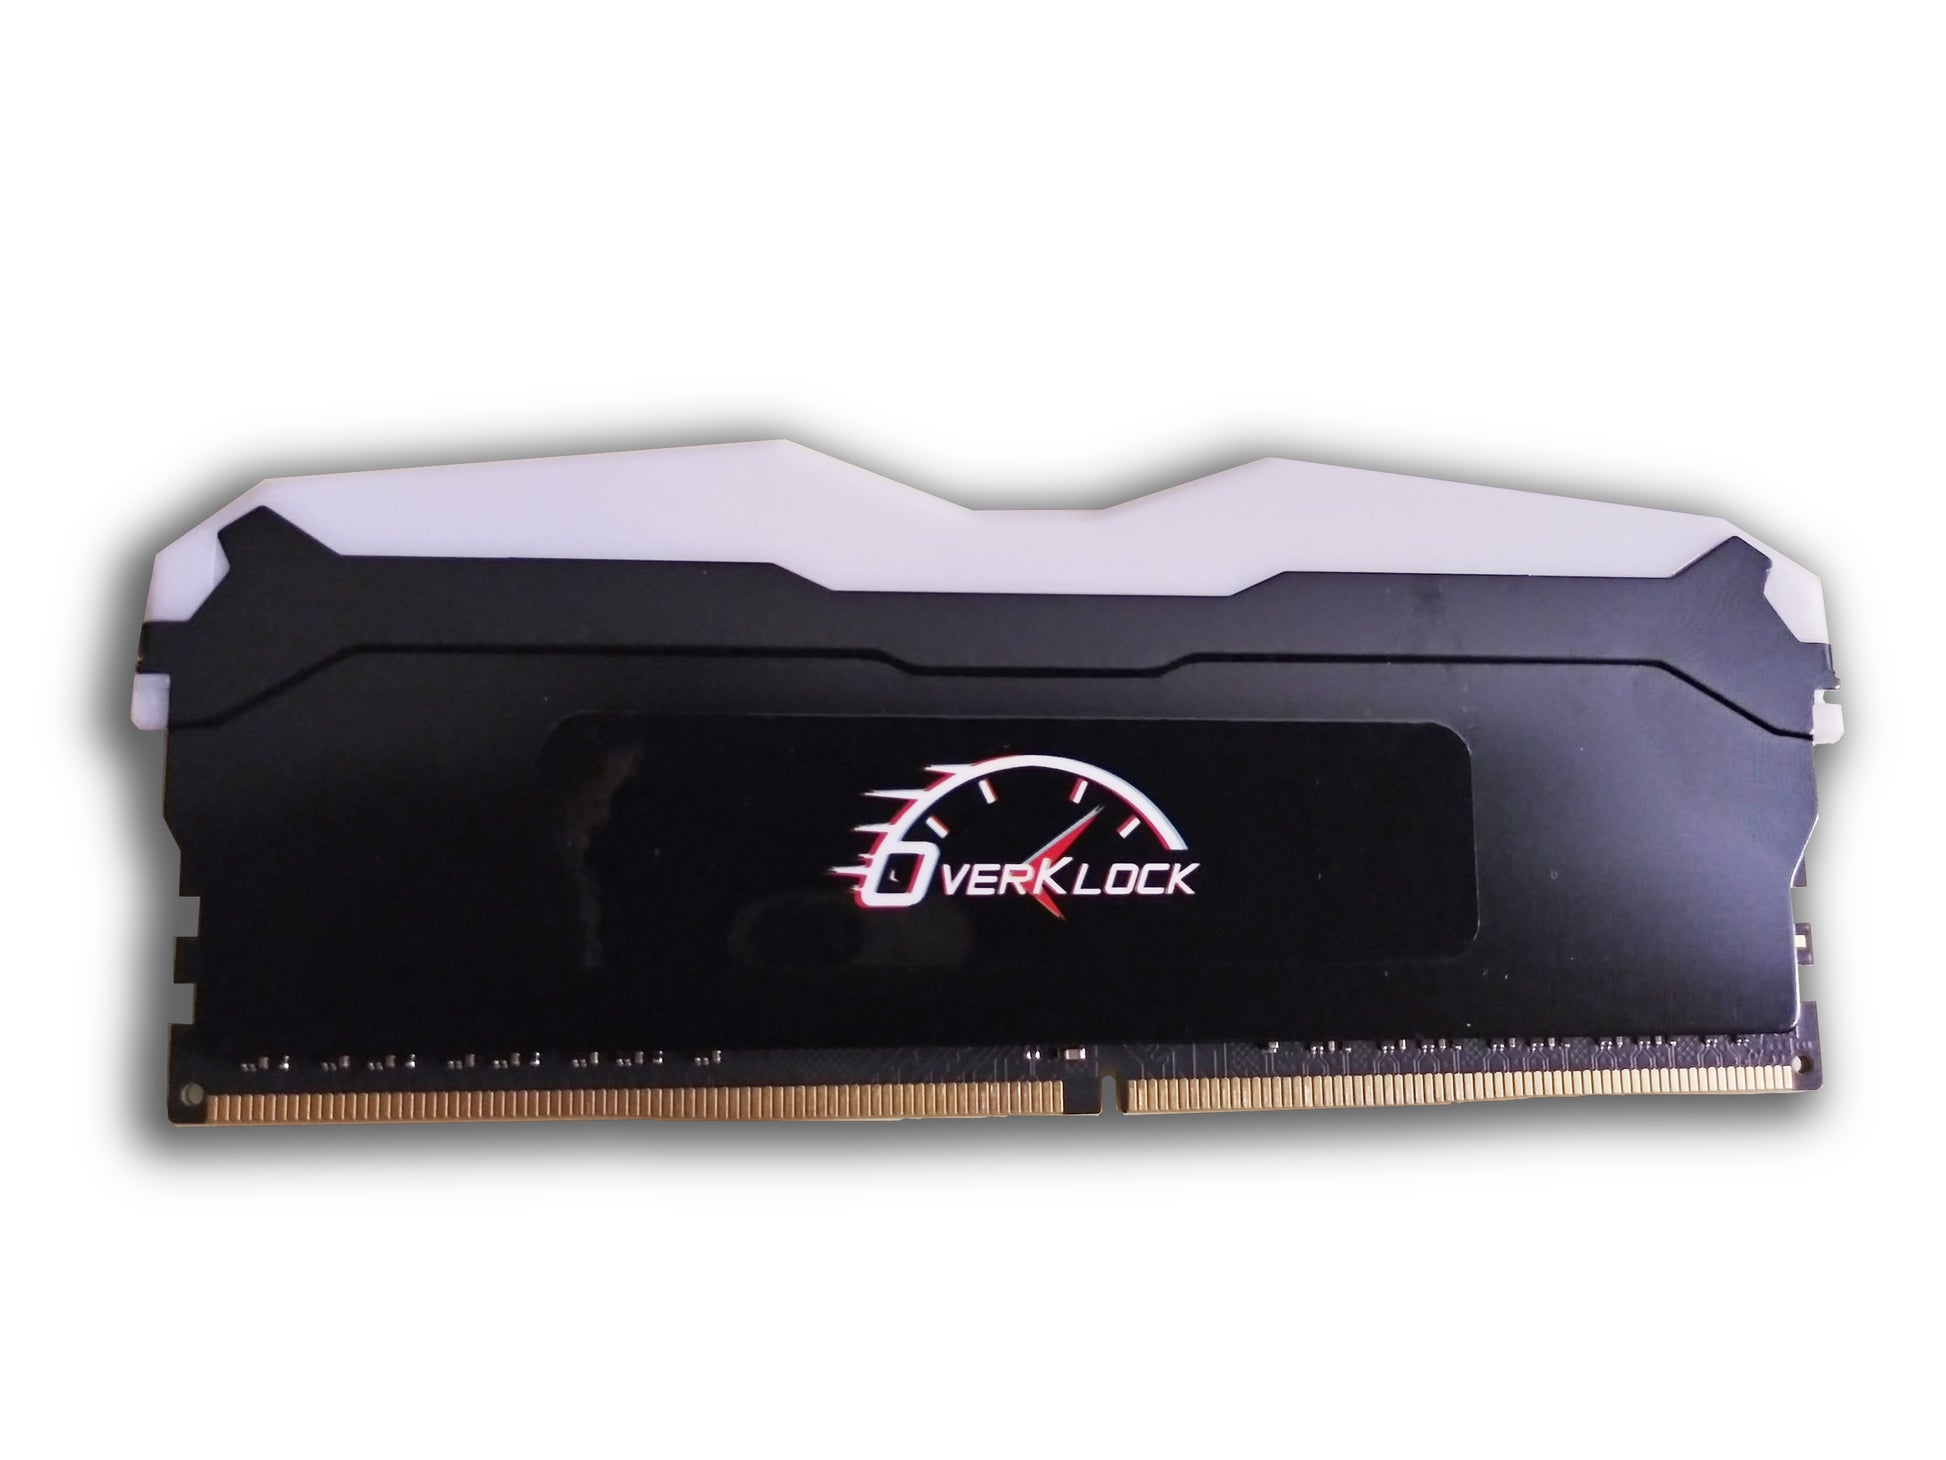 Front view of the 16GB RGB RAM